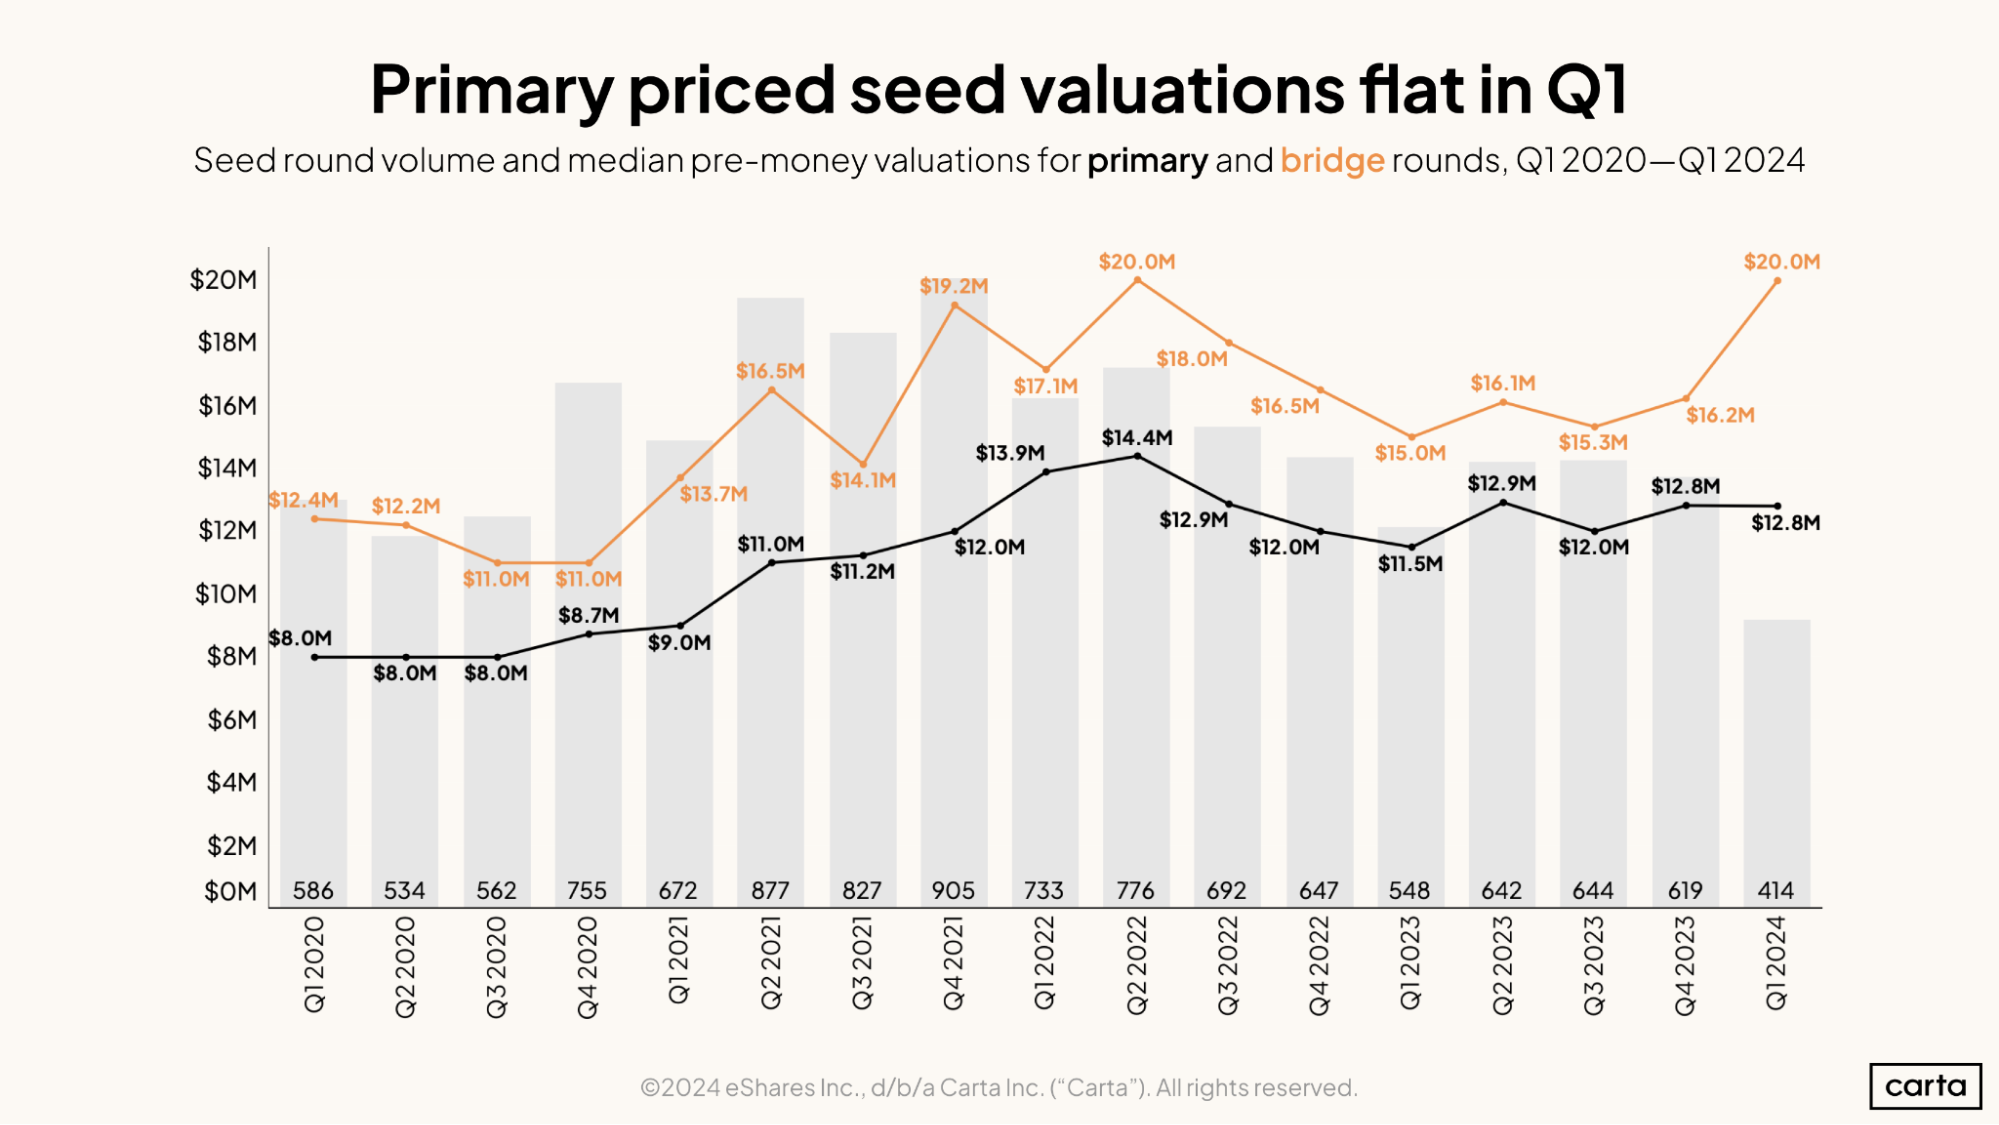 Primary priced seed valuations flat in Q1